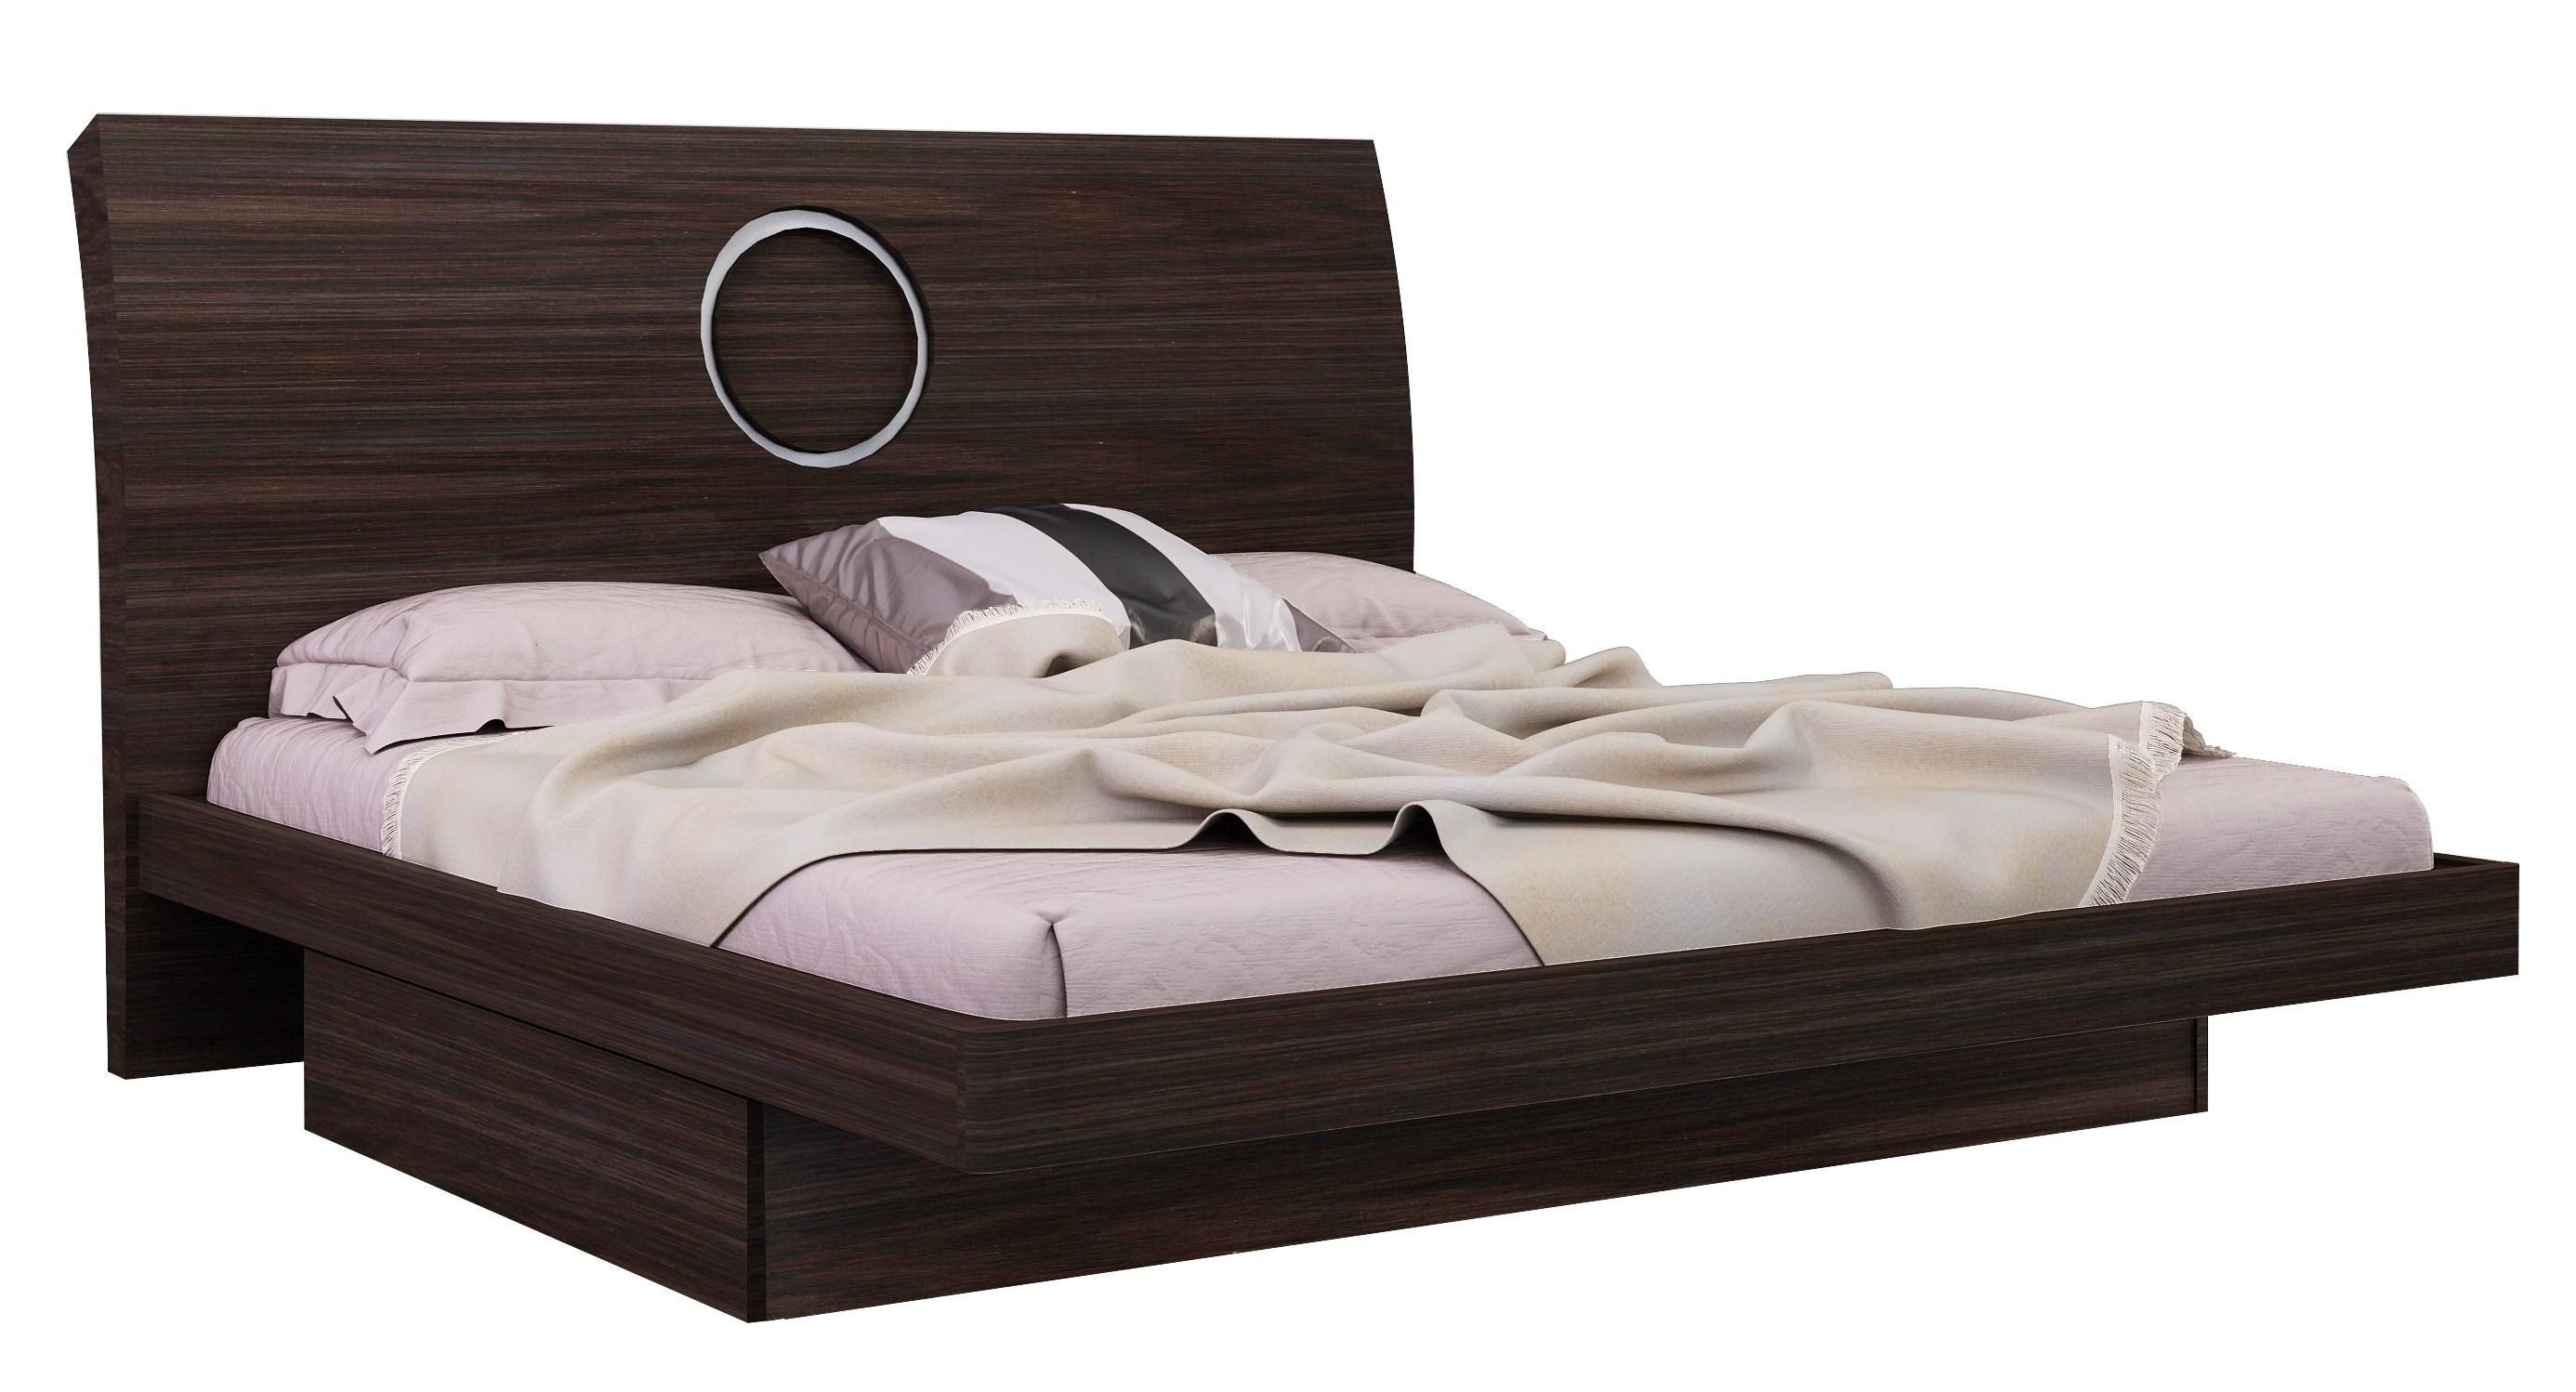 Contemporary, Modern Platform Bed Monte Carlo MONTE-BED-WENGE-CK in Wenge Lacquer